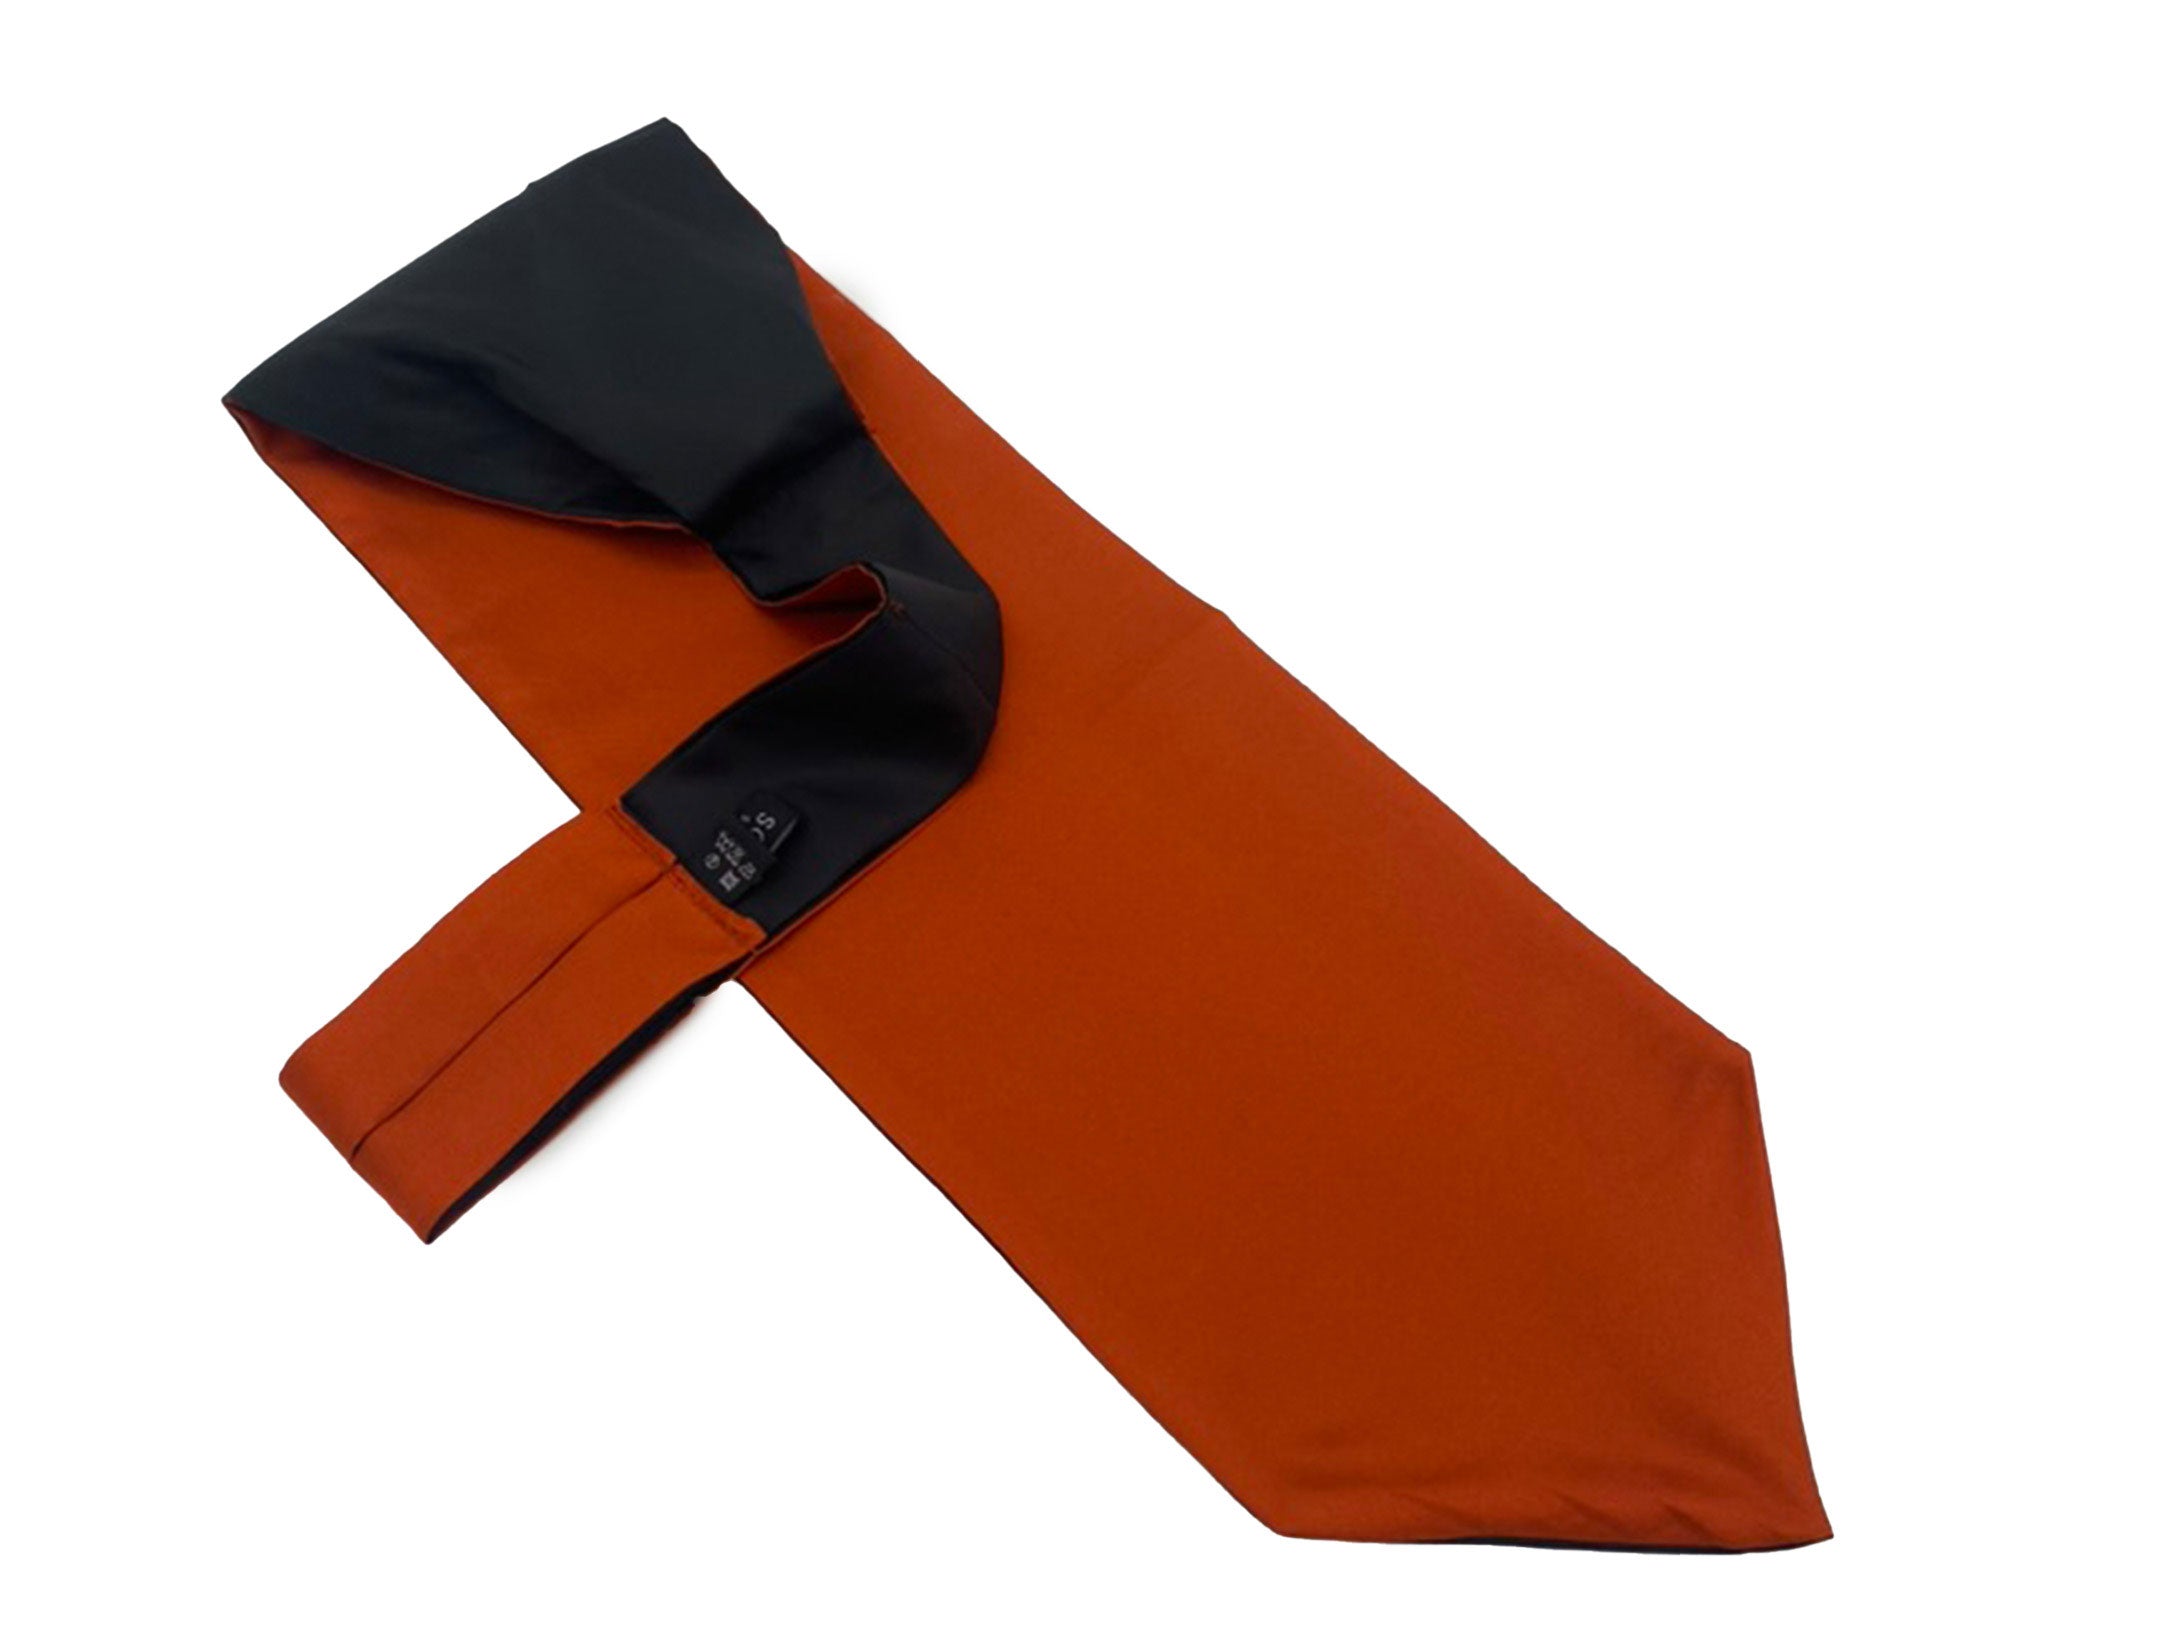 Red 'Barcelona' single pointed Ascot tie arranged diagonally with wide point in foreground. Narrow end of tie folded back and over to reveal dark lining and 'SOHO Scarves' branding label.